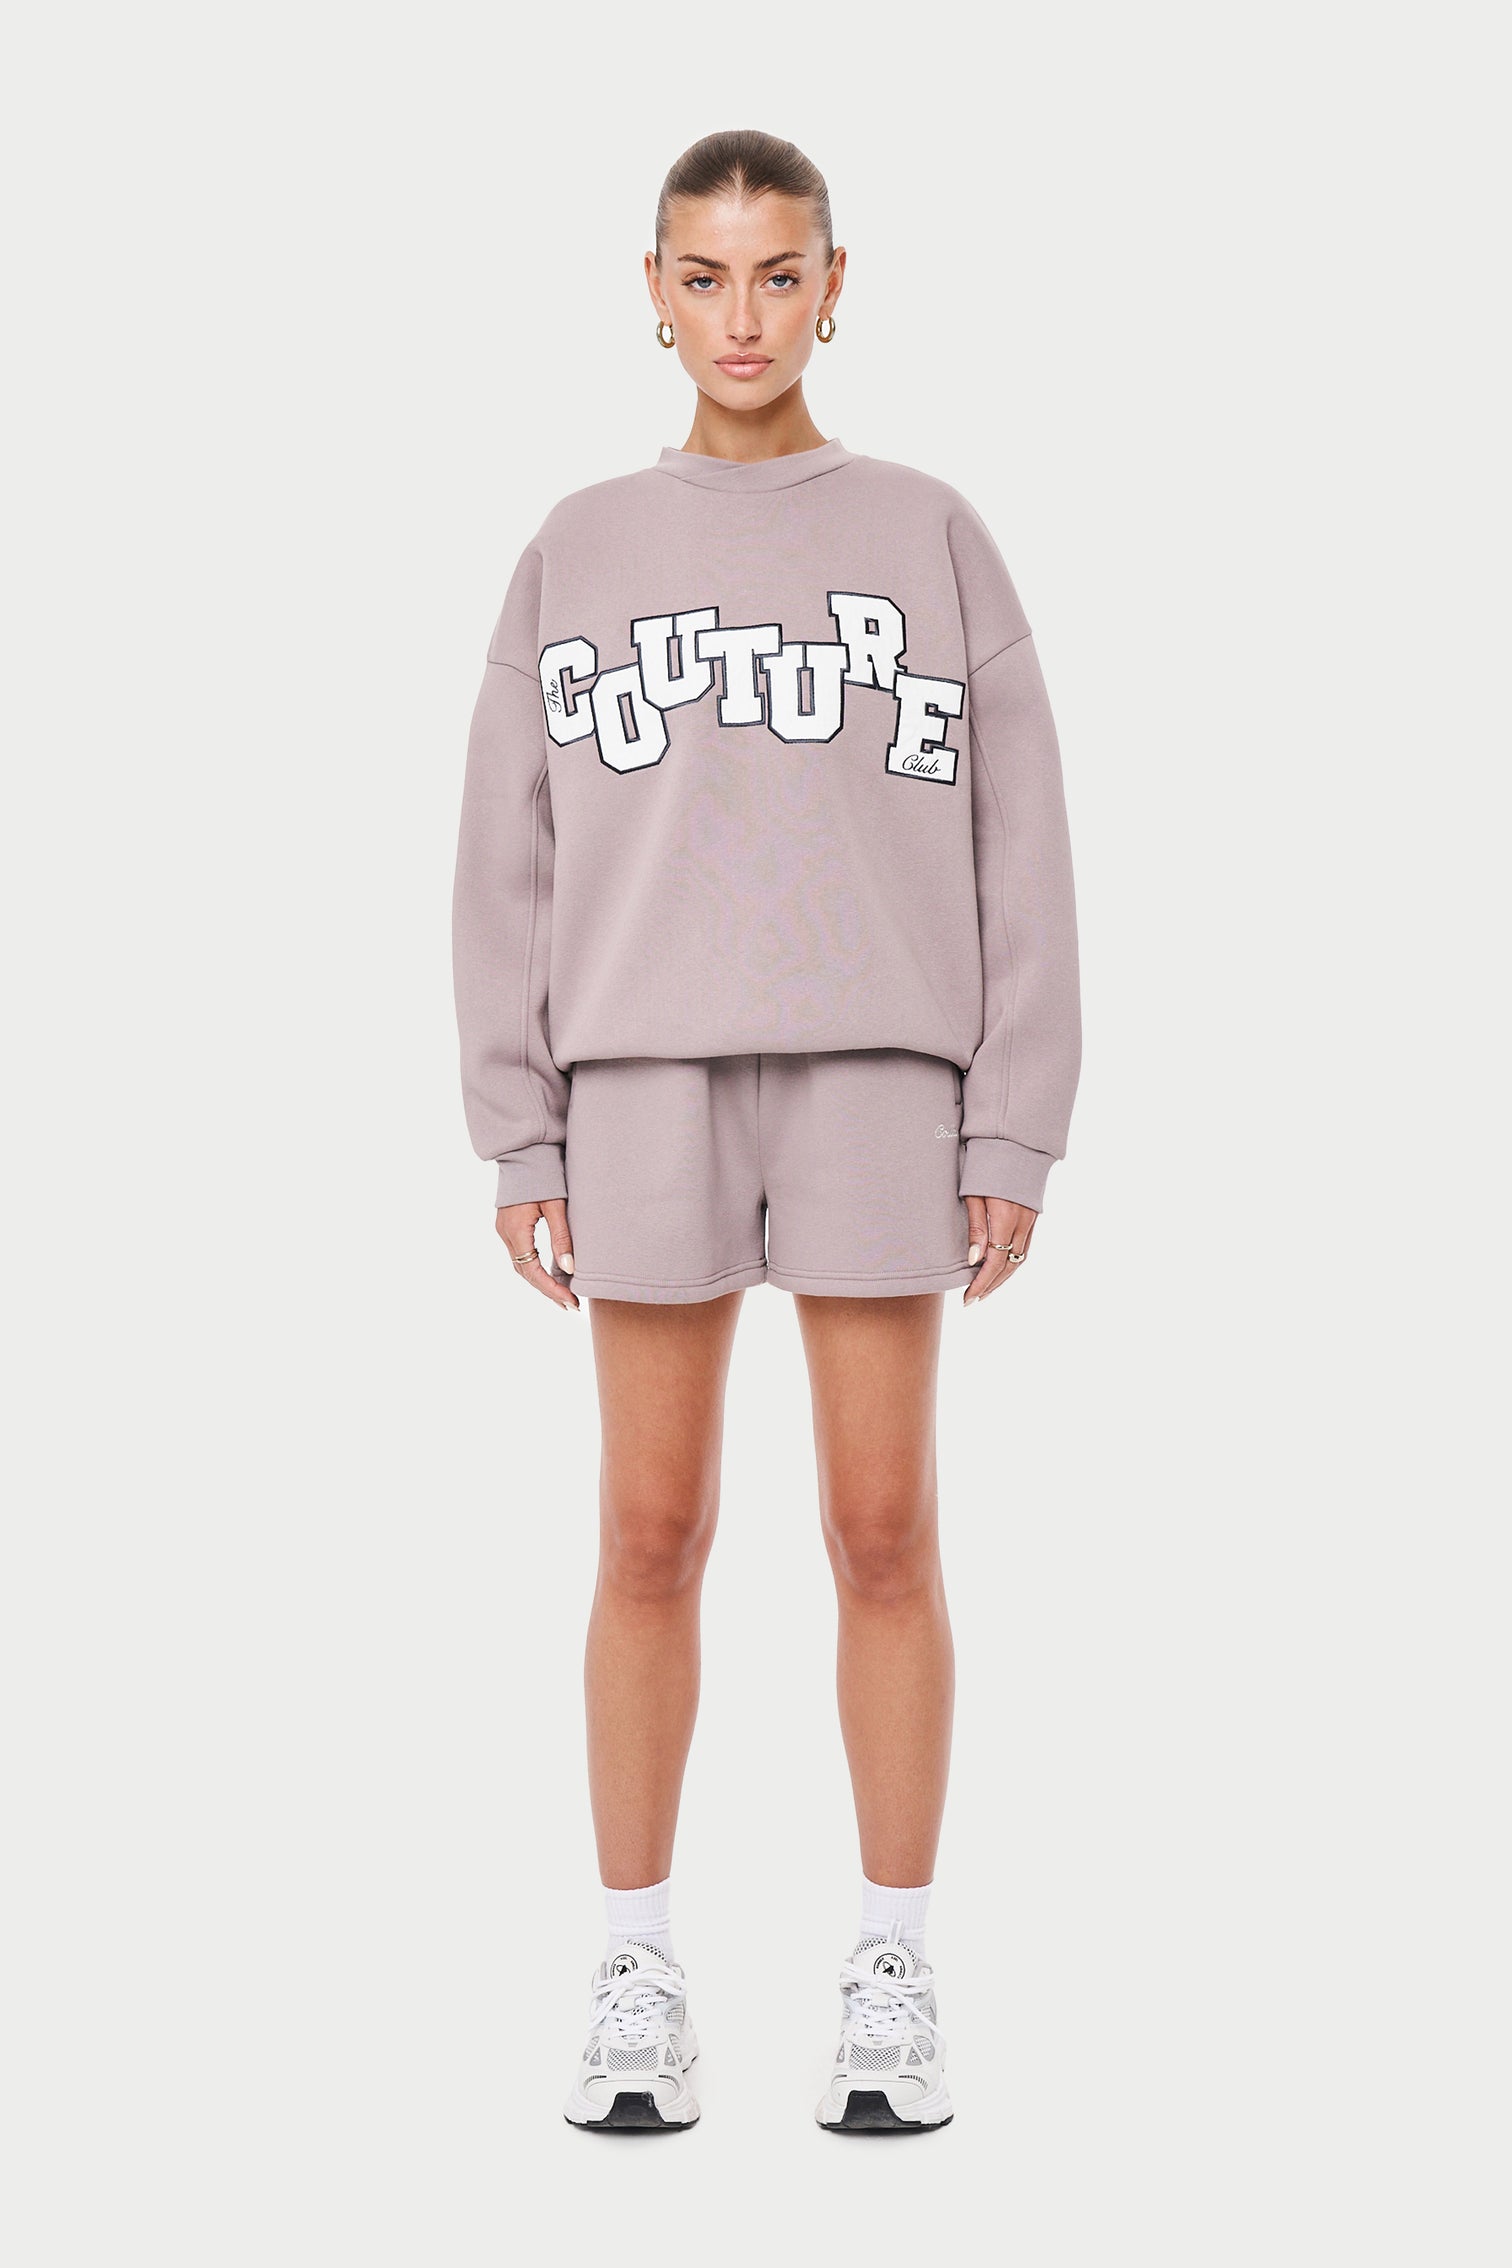 New In | Latest Women's Clothing | The Couture Club